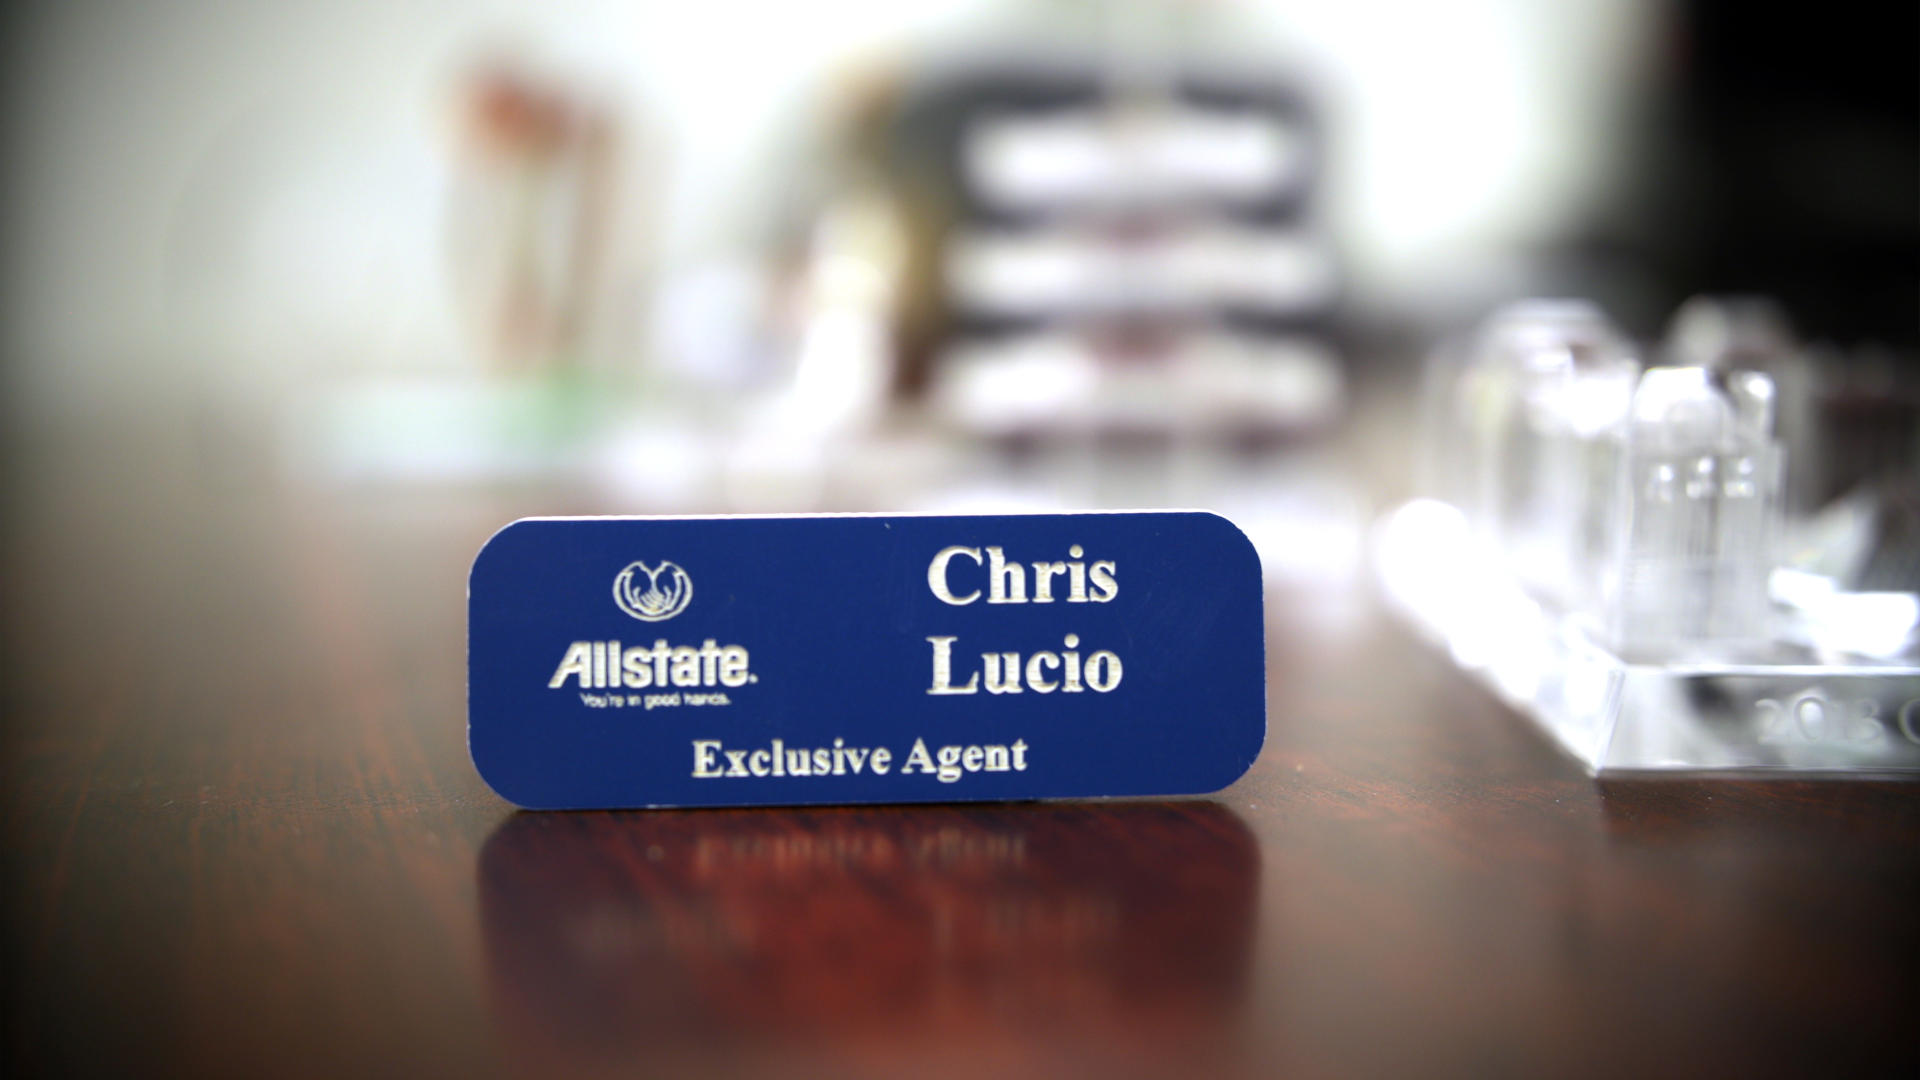 Throwback Allstate logo, and name tag for Chris starting in 2007